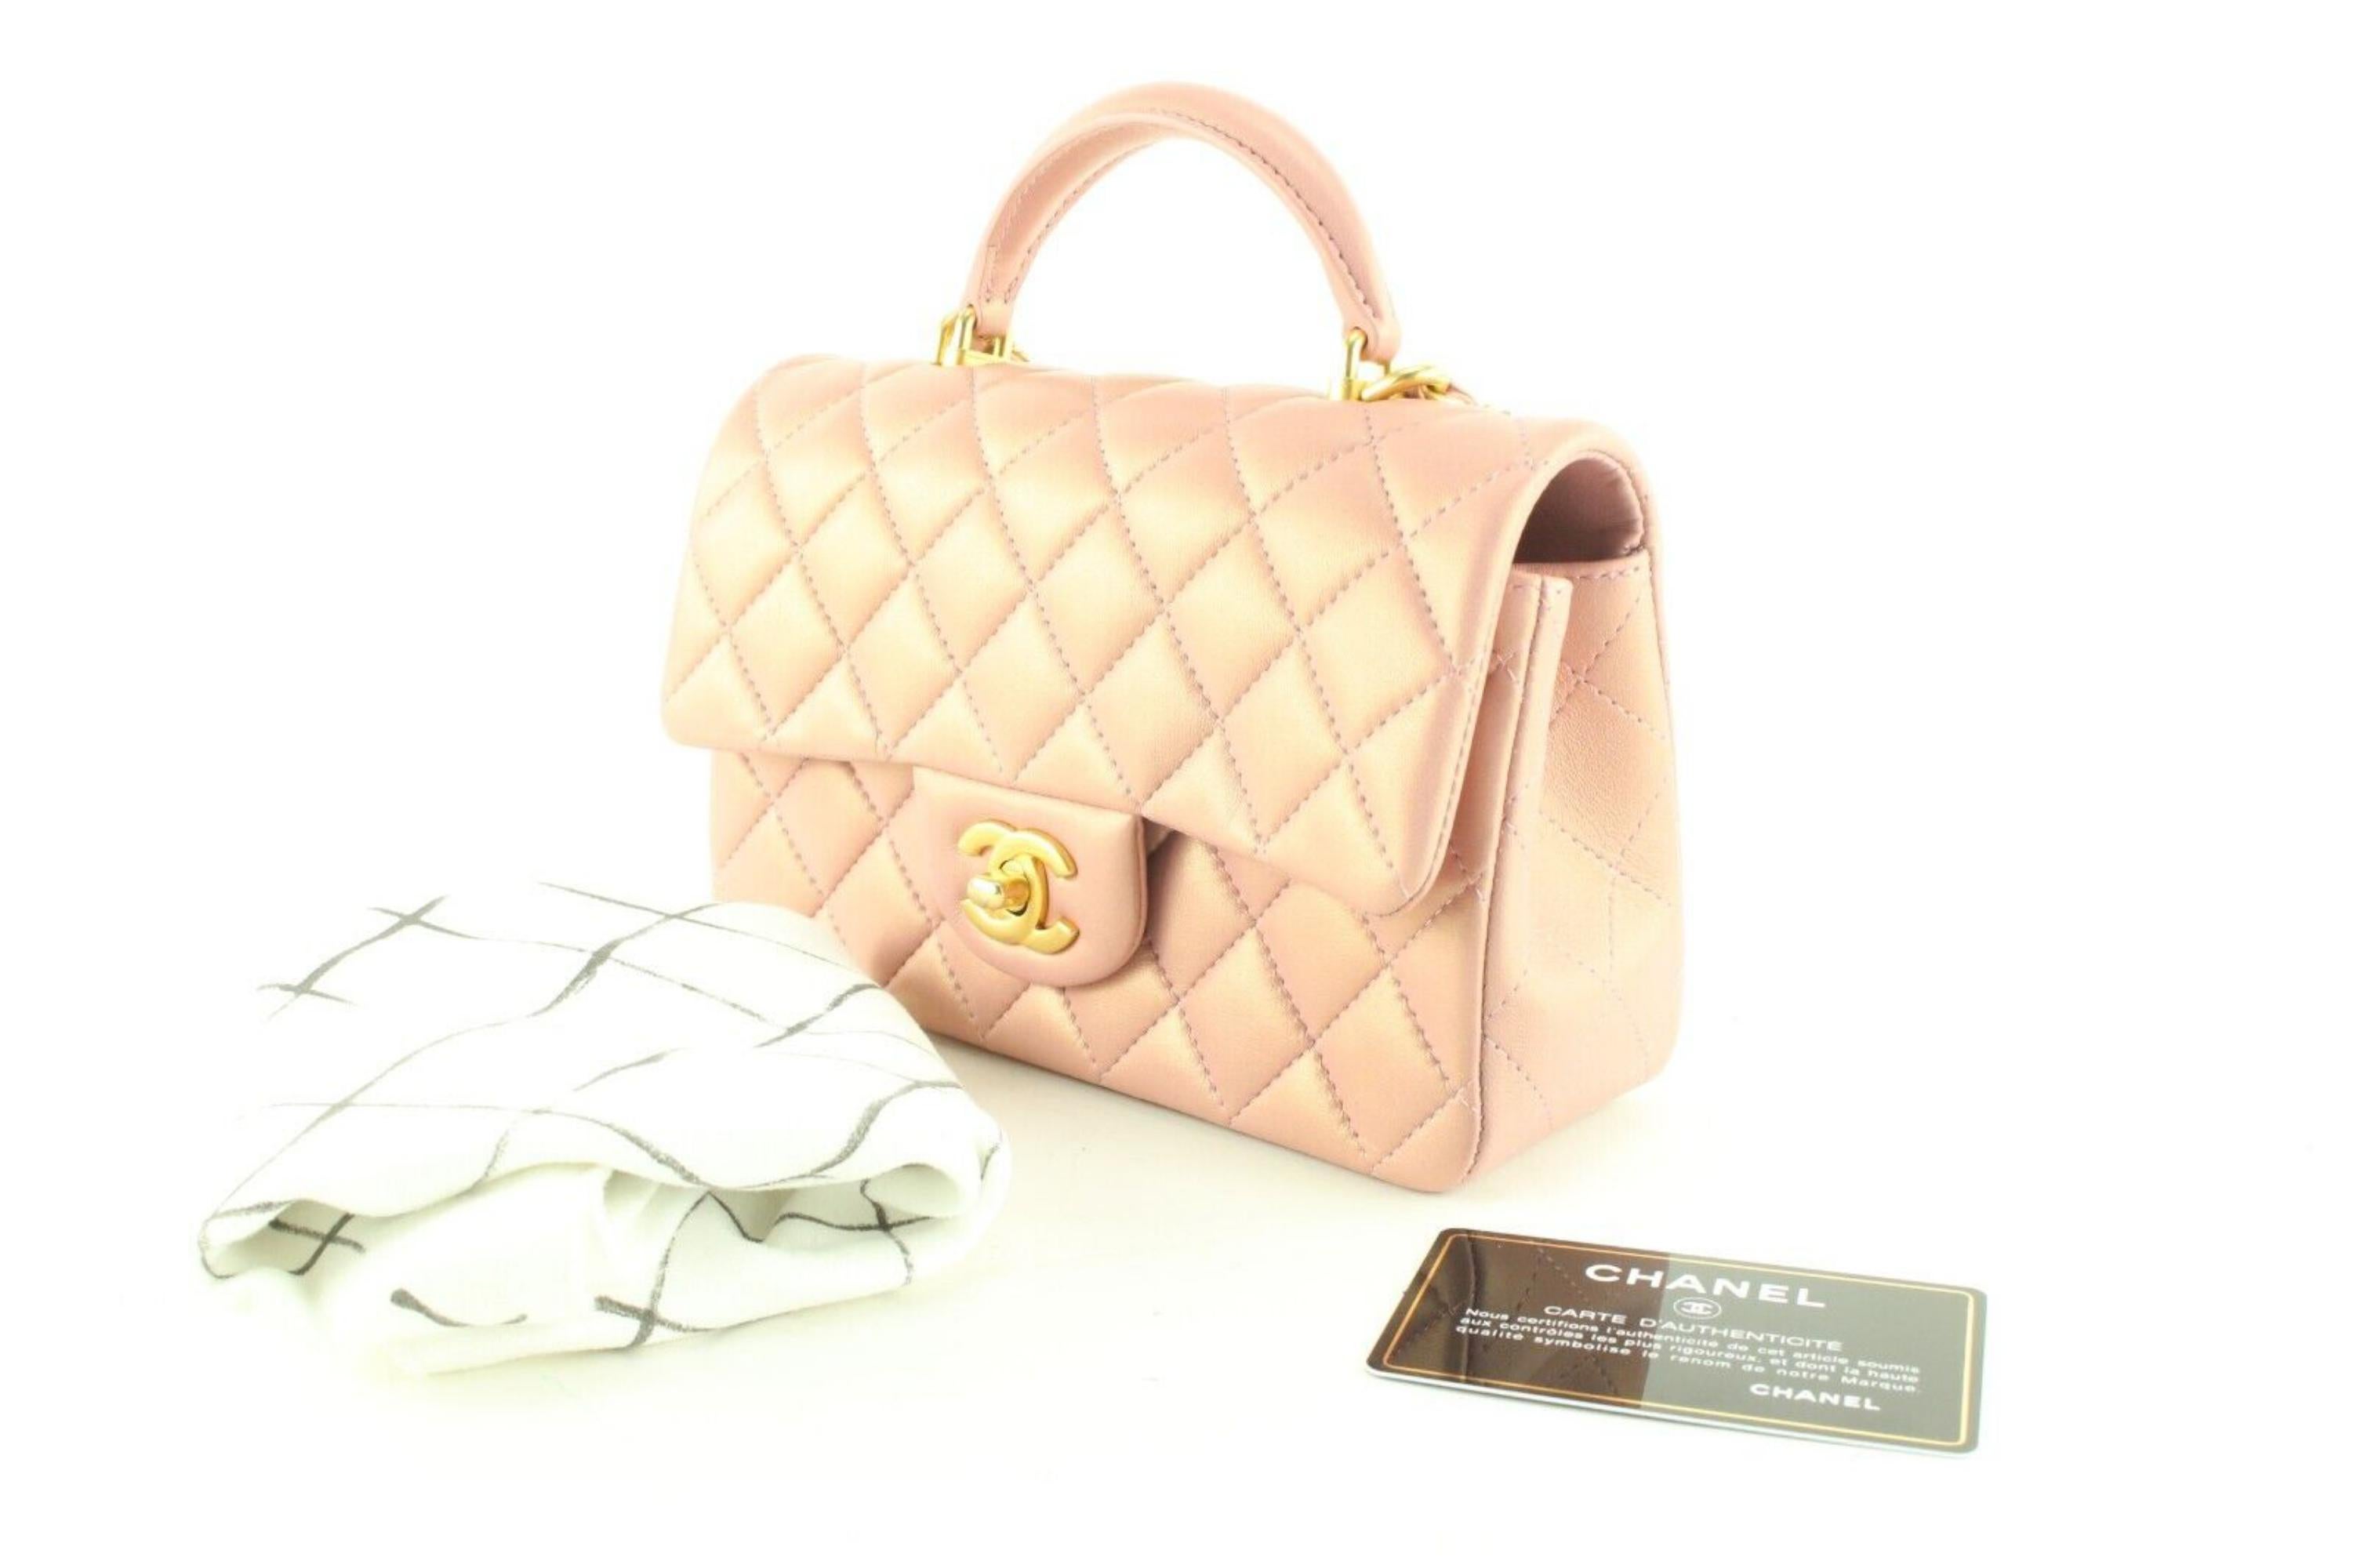 Chanel Metallic Pink Iridescent Mini Top Handle Classic Flap GHW 1CK0418
Date Code/Serial Number: 31335212

Made In: France

Measurements: Length:  7.5